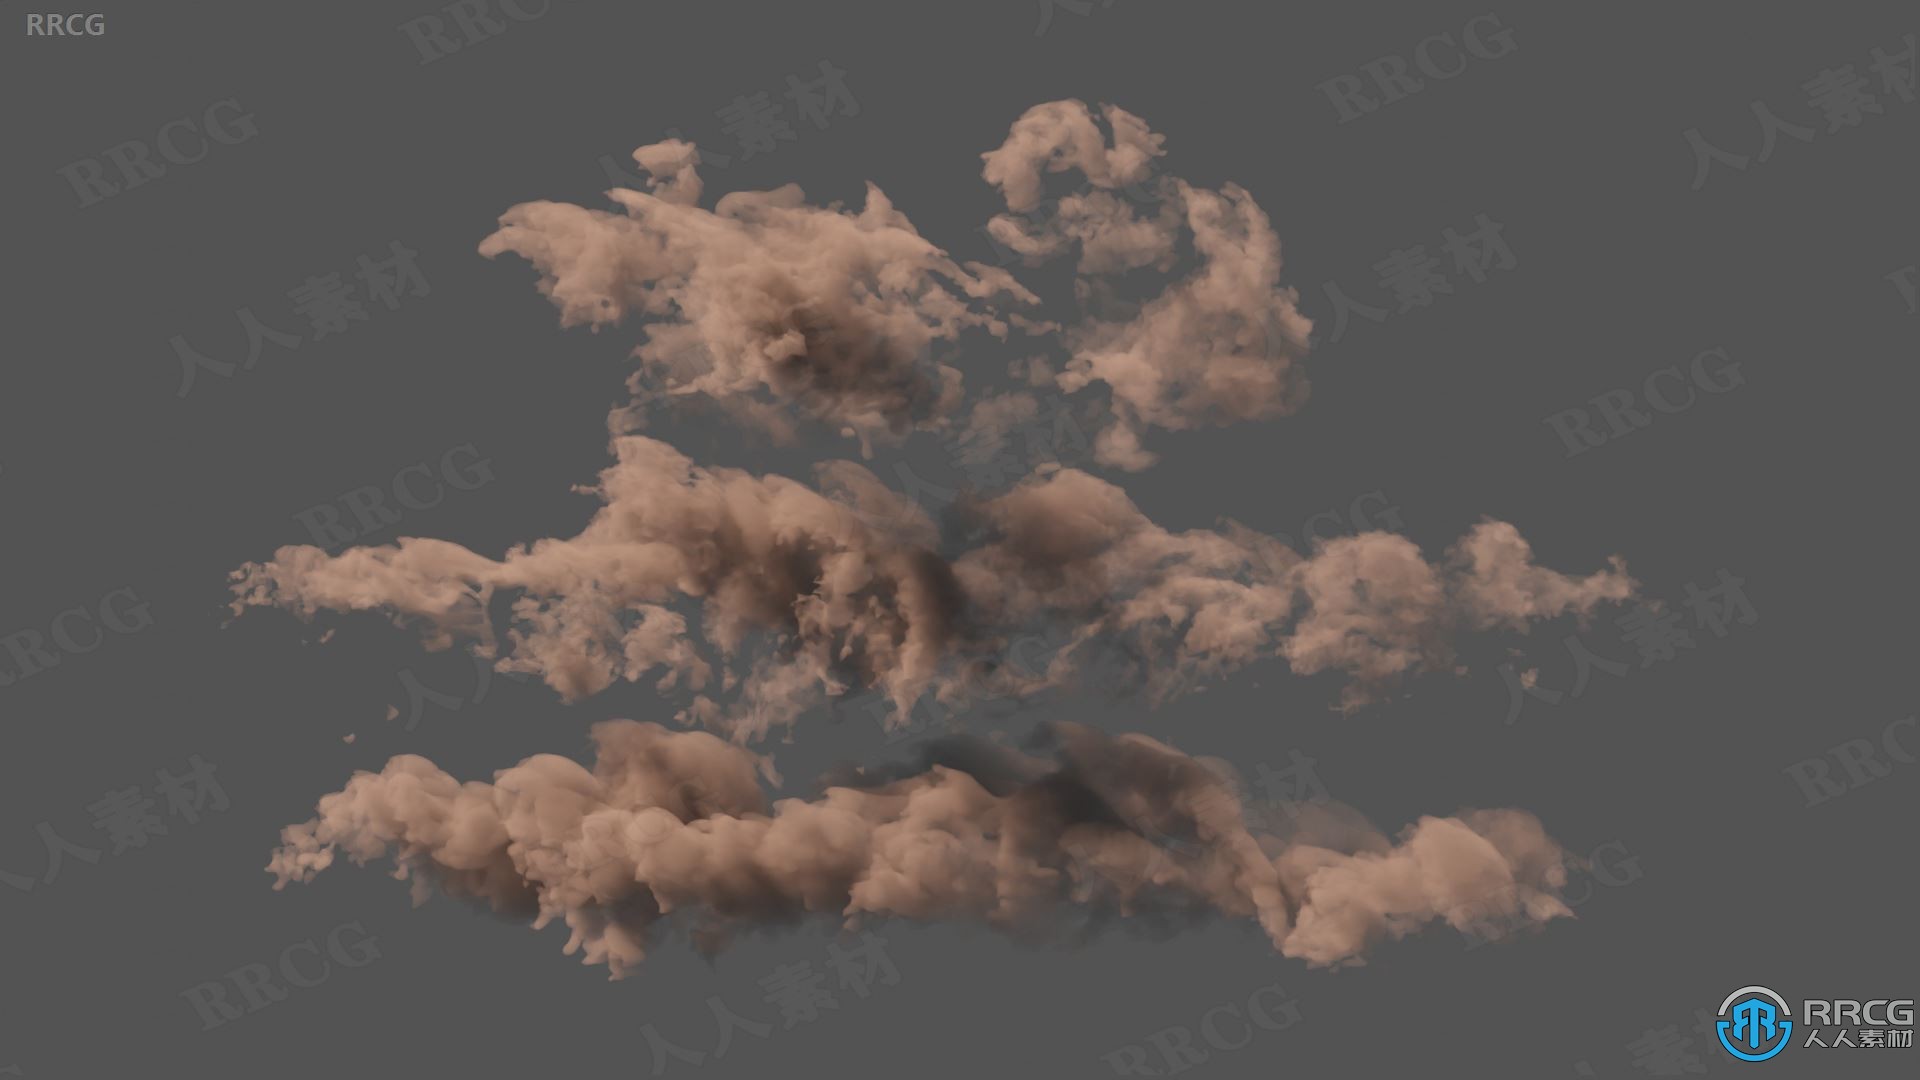 Aaa Clouds And Cloud Mixer云彩云朵生成Blender插件V0.1.0版